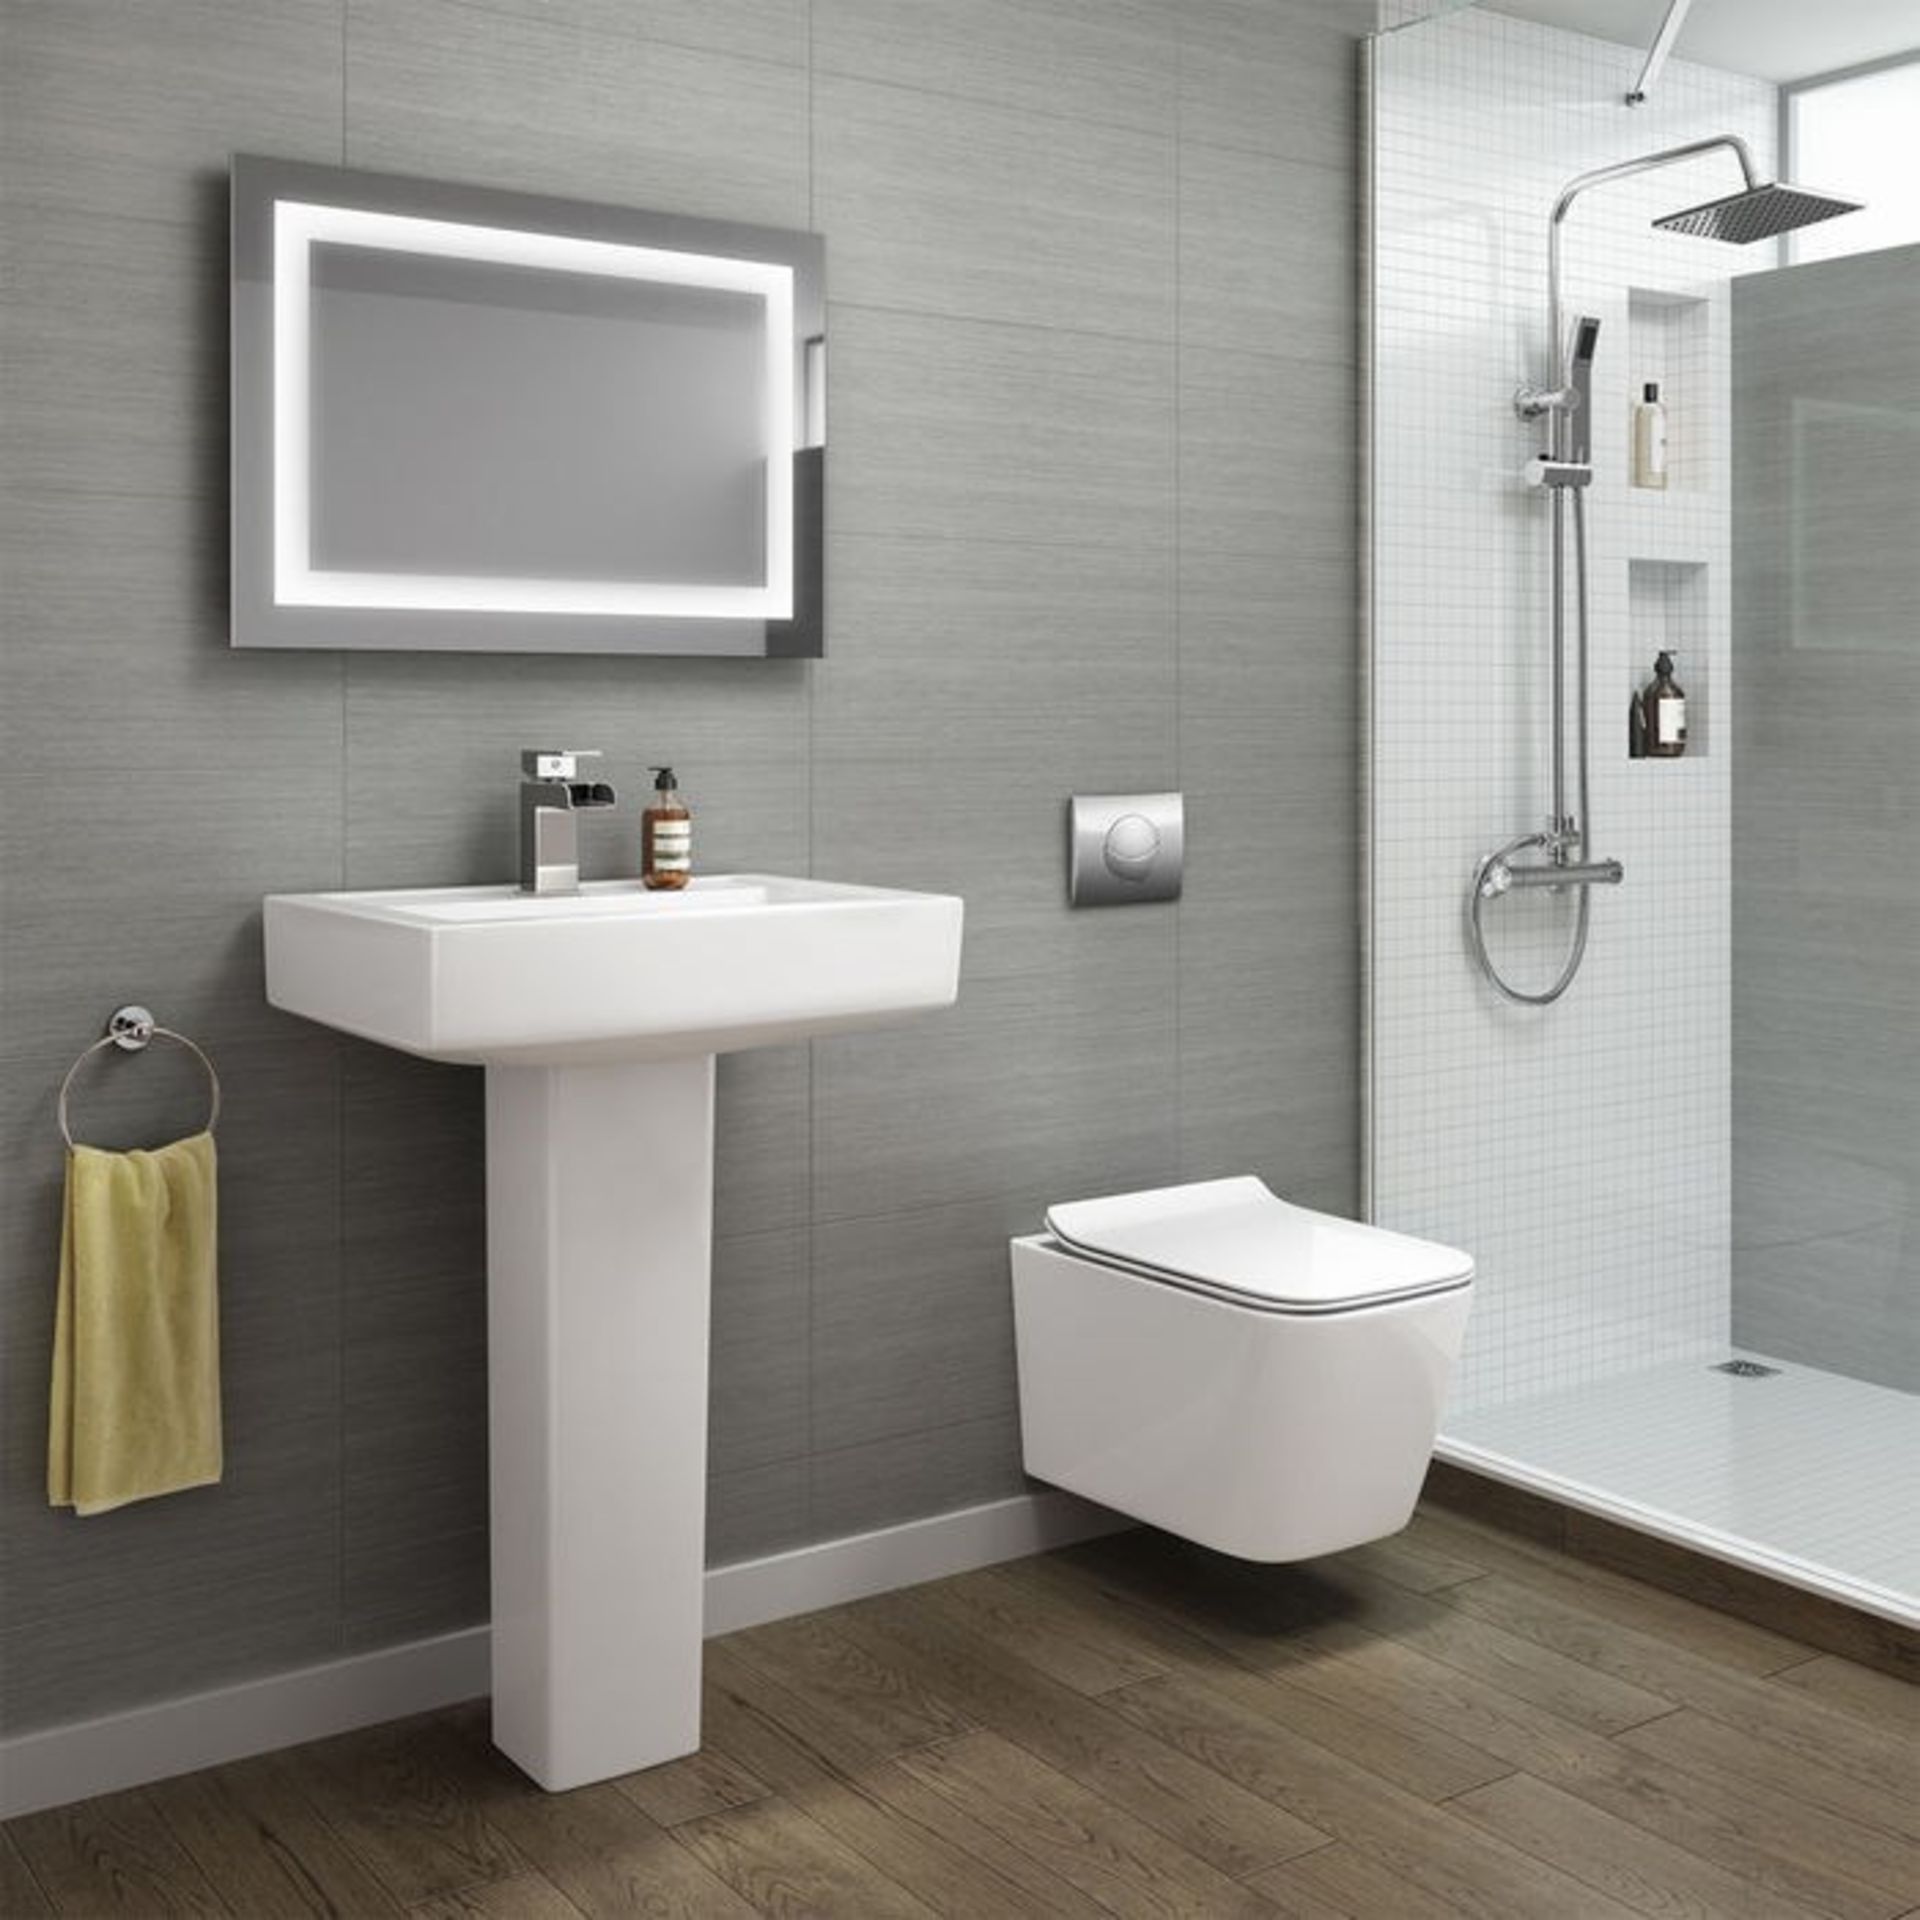 Florence Wall Hung Toilet inc Luxury Soft Close Seat Made from White Vitreous China Anti-scratc... - Image 2 of 2